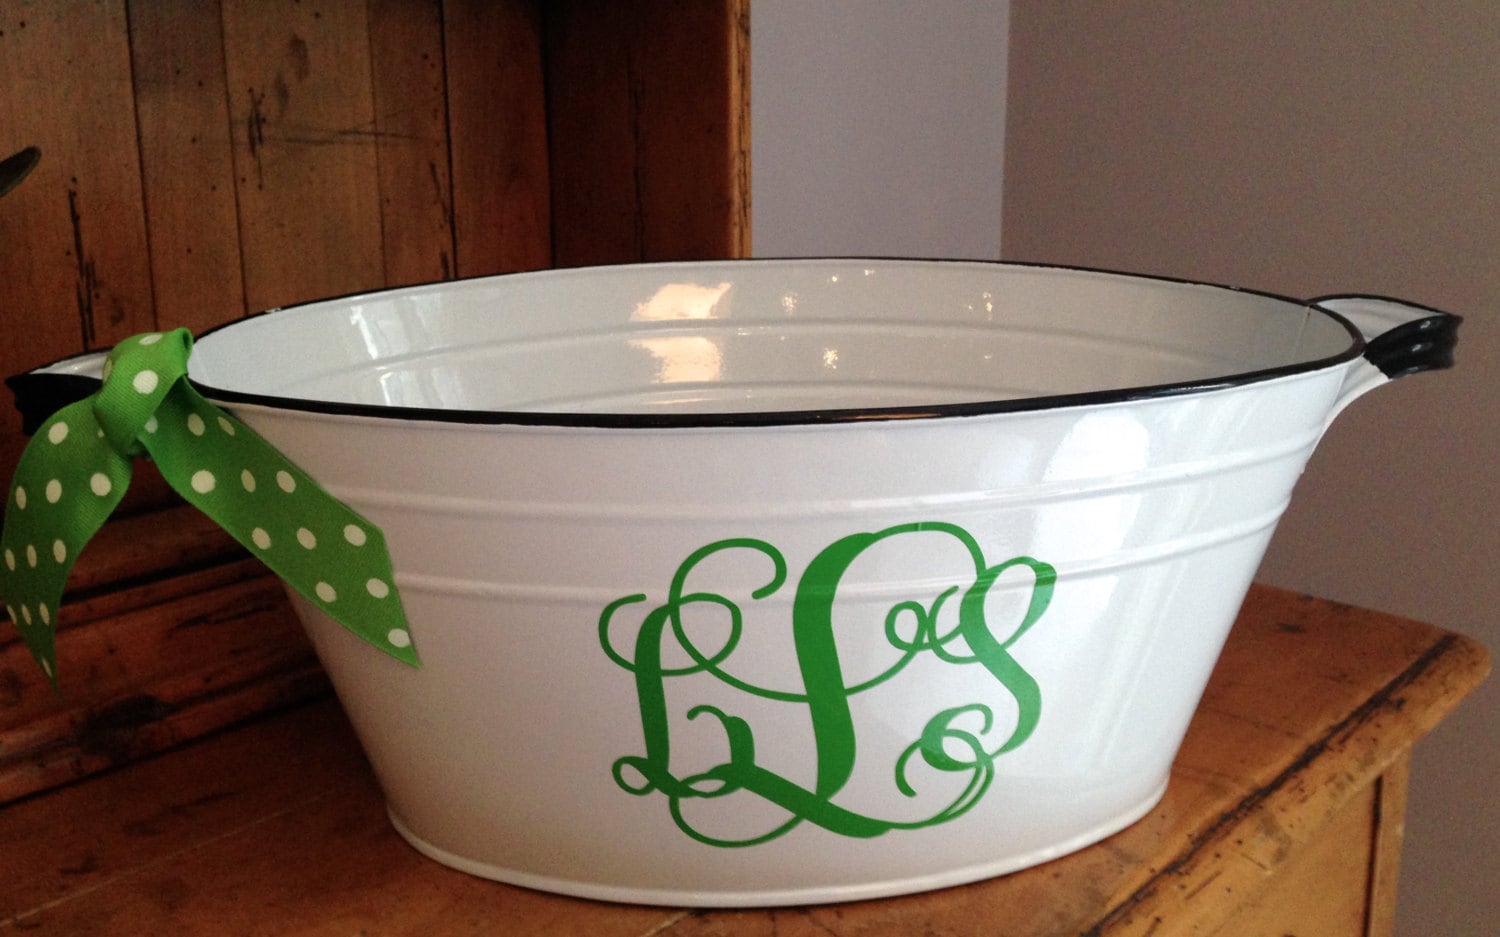 Personalized Metal Tub / Oval Metal Beverage Tub. Great for